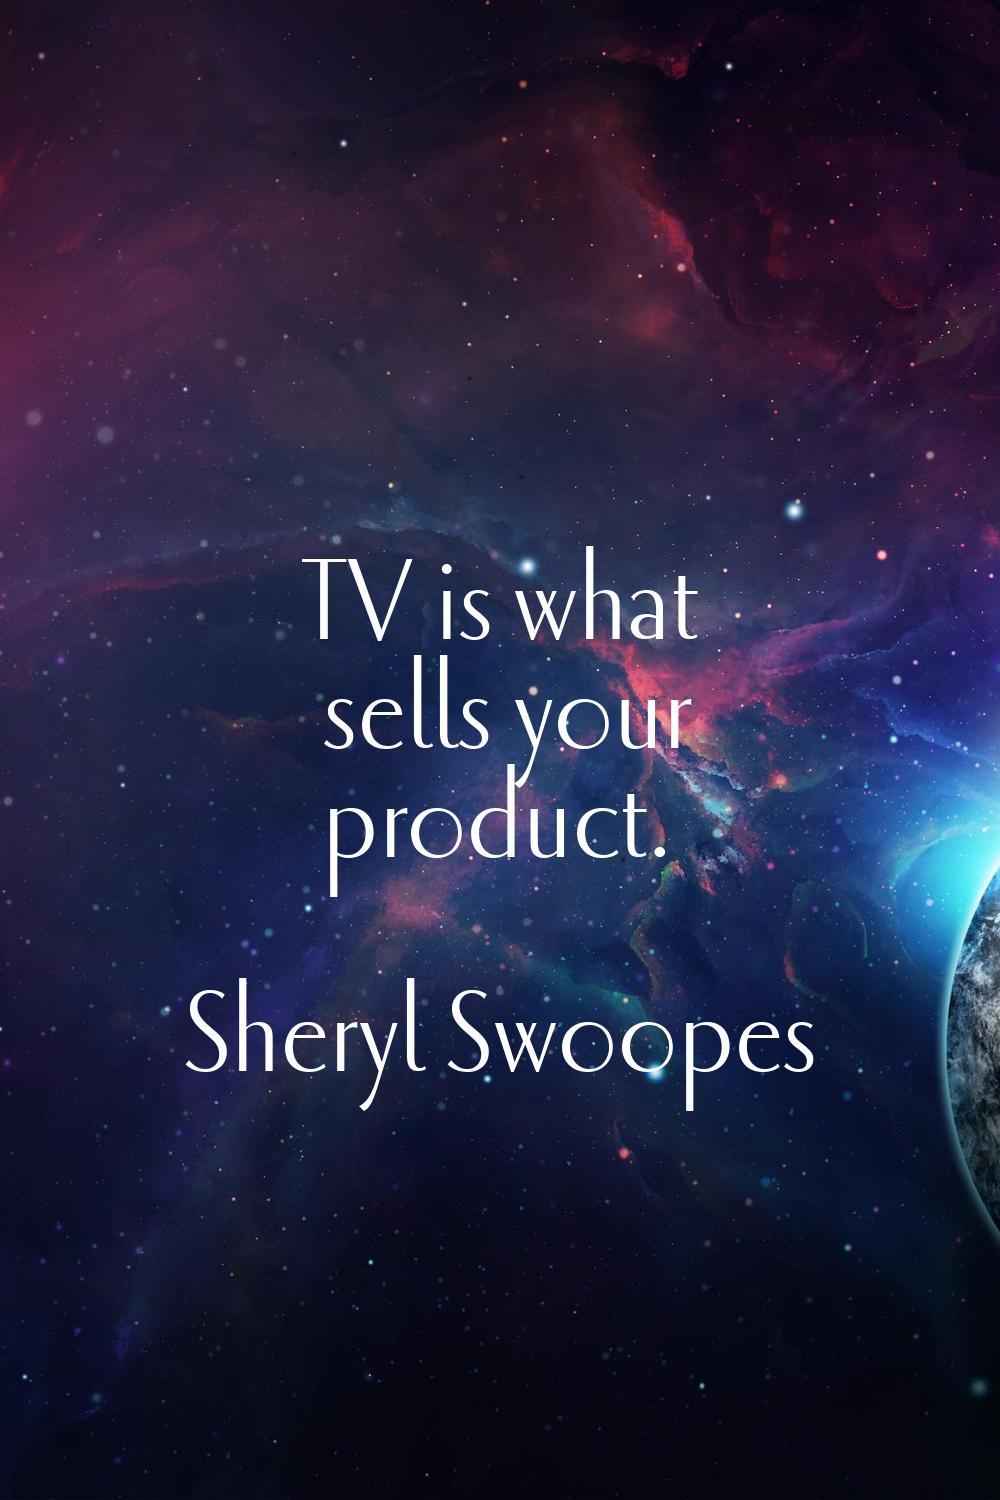 TV is what sells your product.